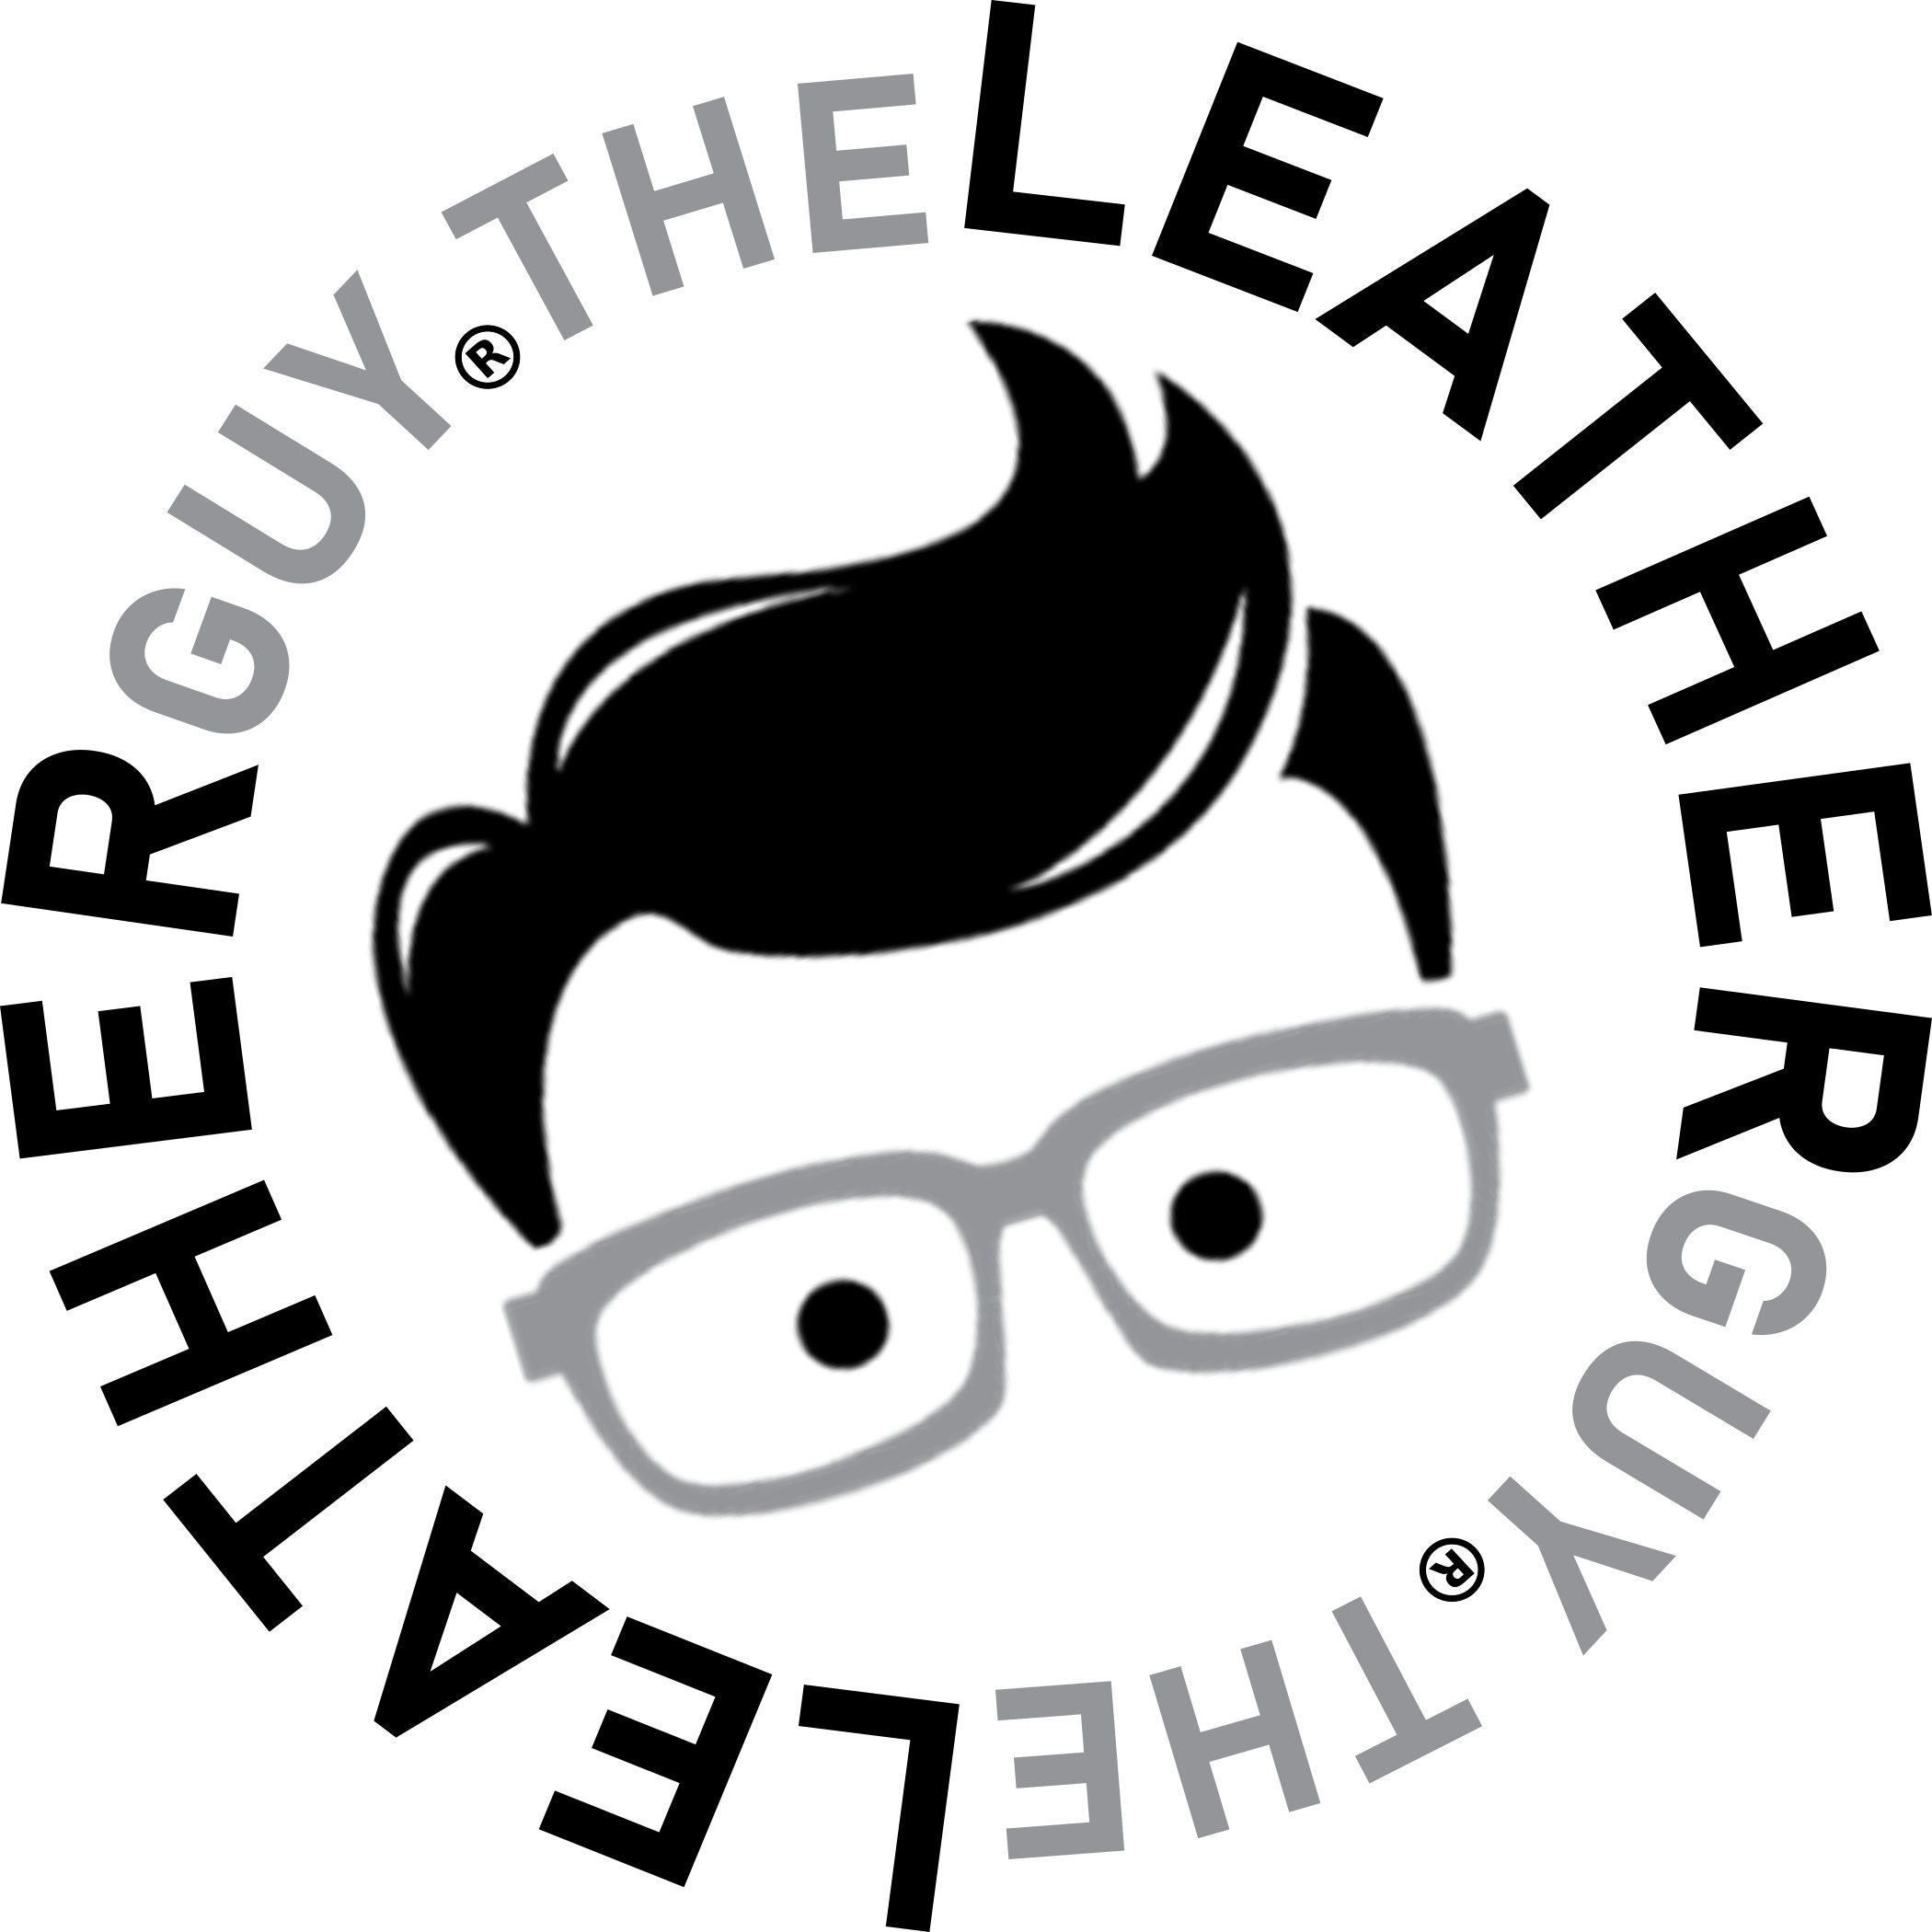 The Leather Guy  Leather Hides, Scraps, Supplies & Hardware